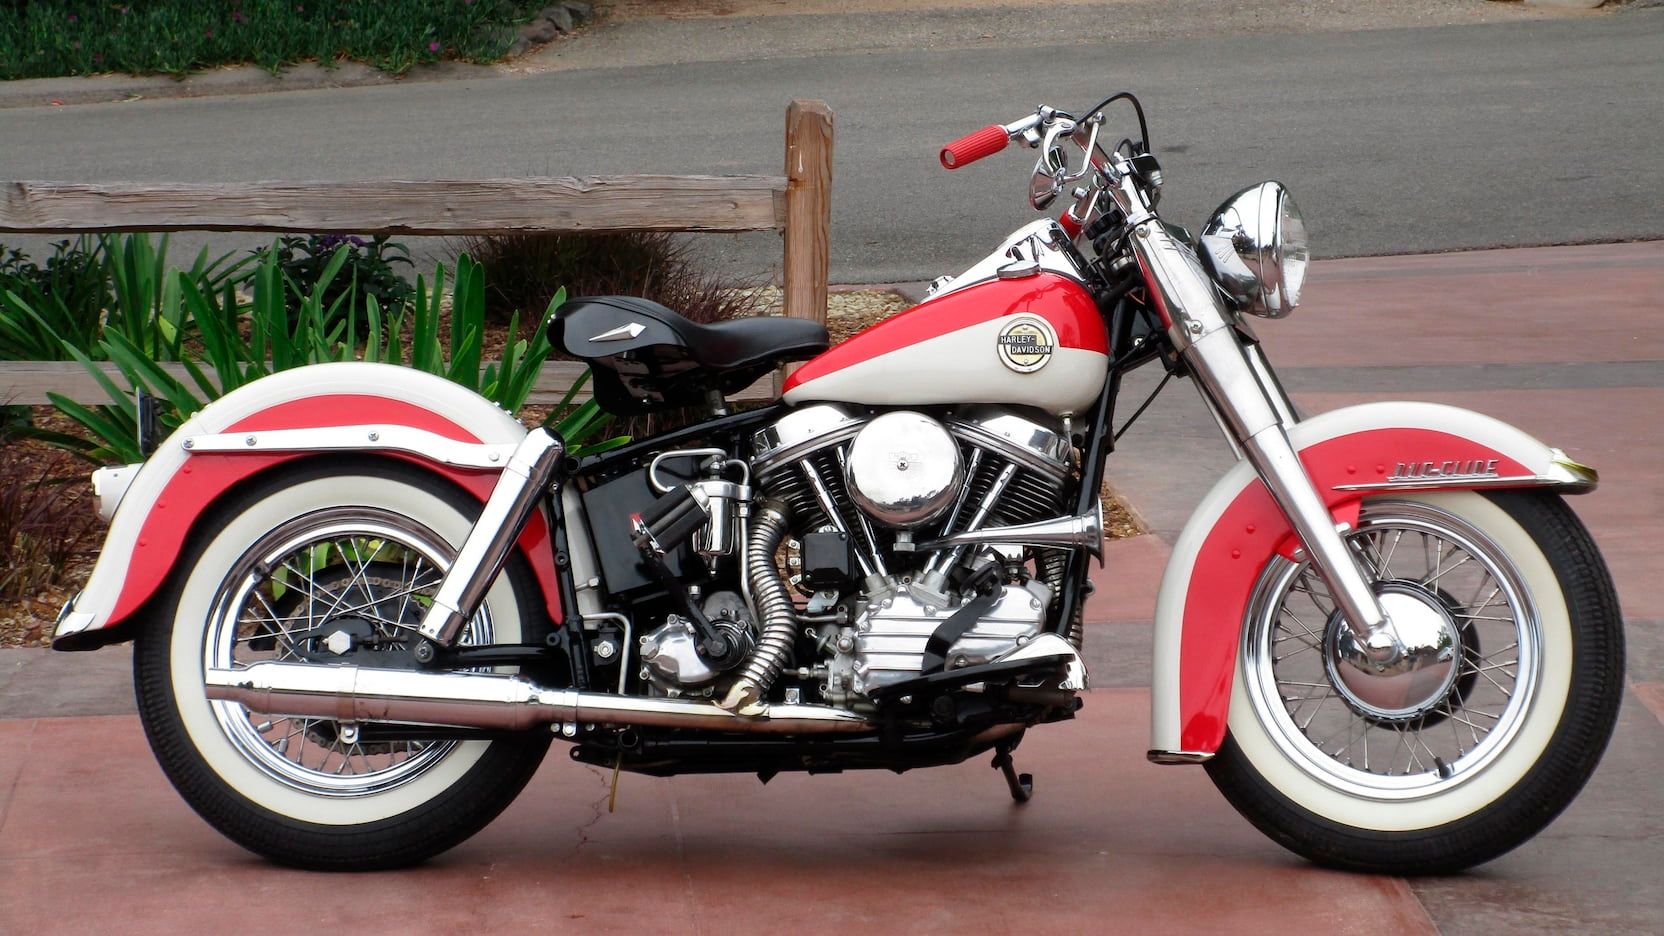 1958 Harley Davidson Duo-Glide parked outside